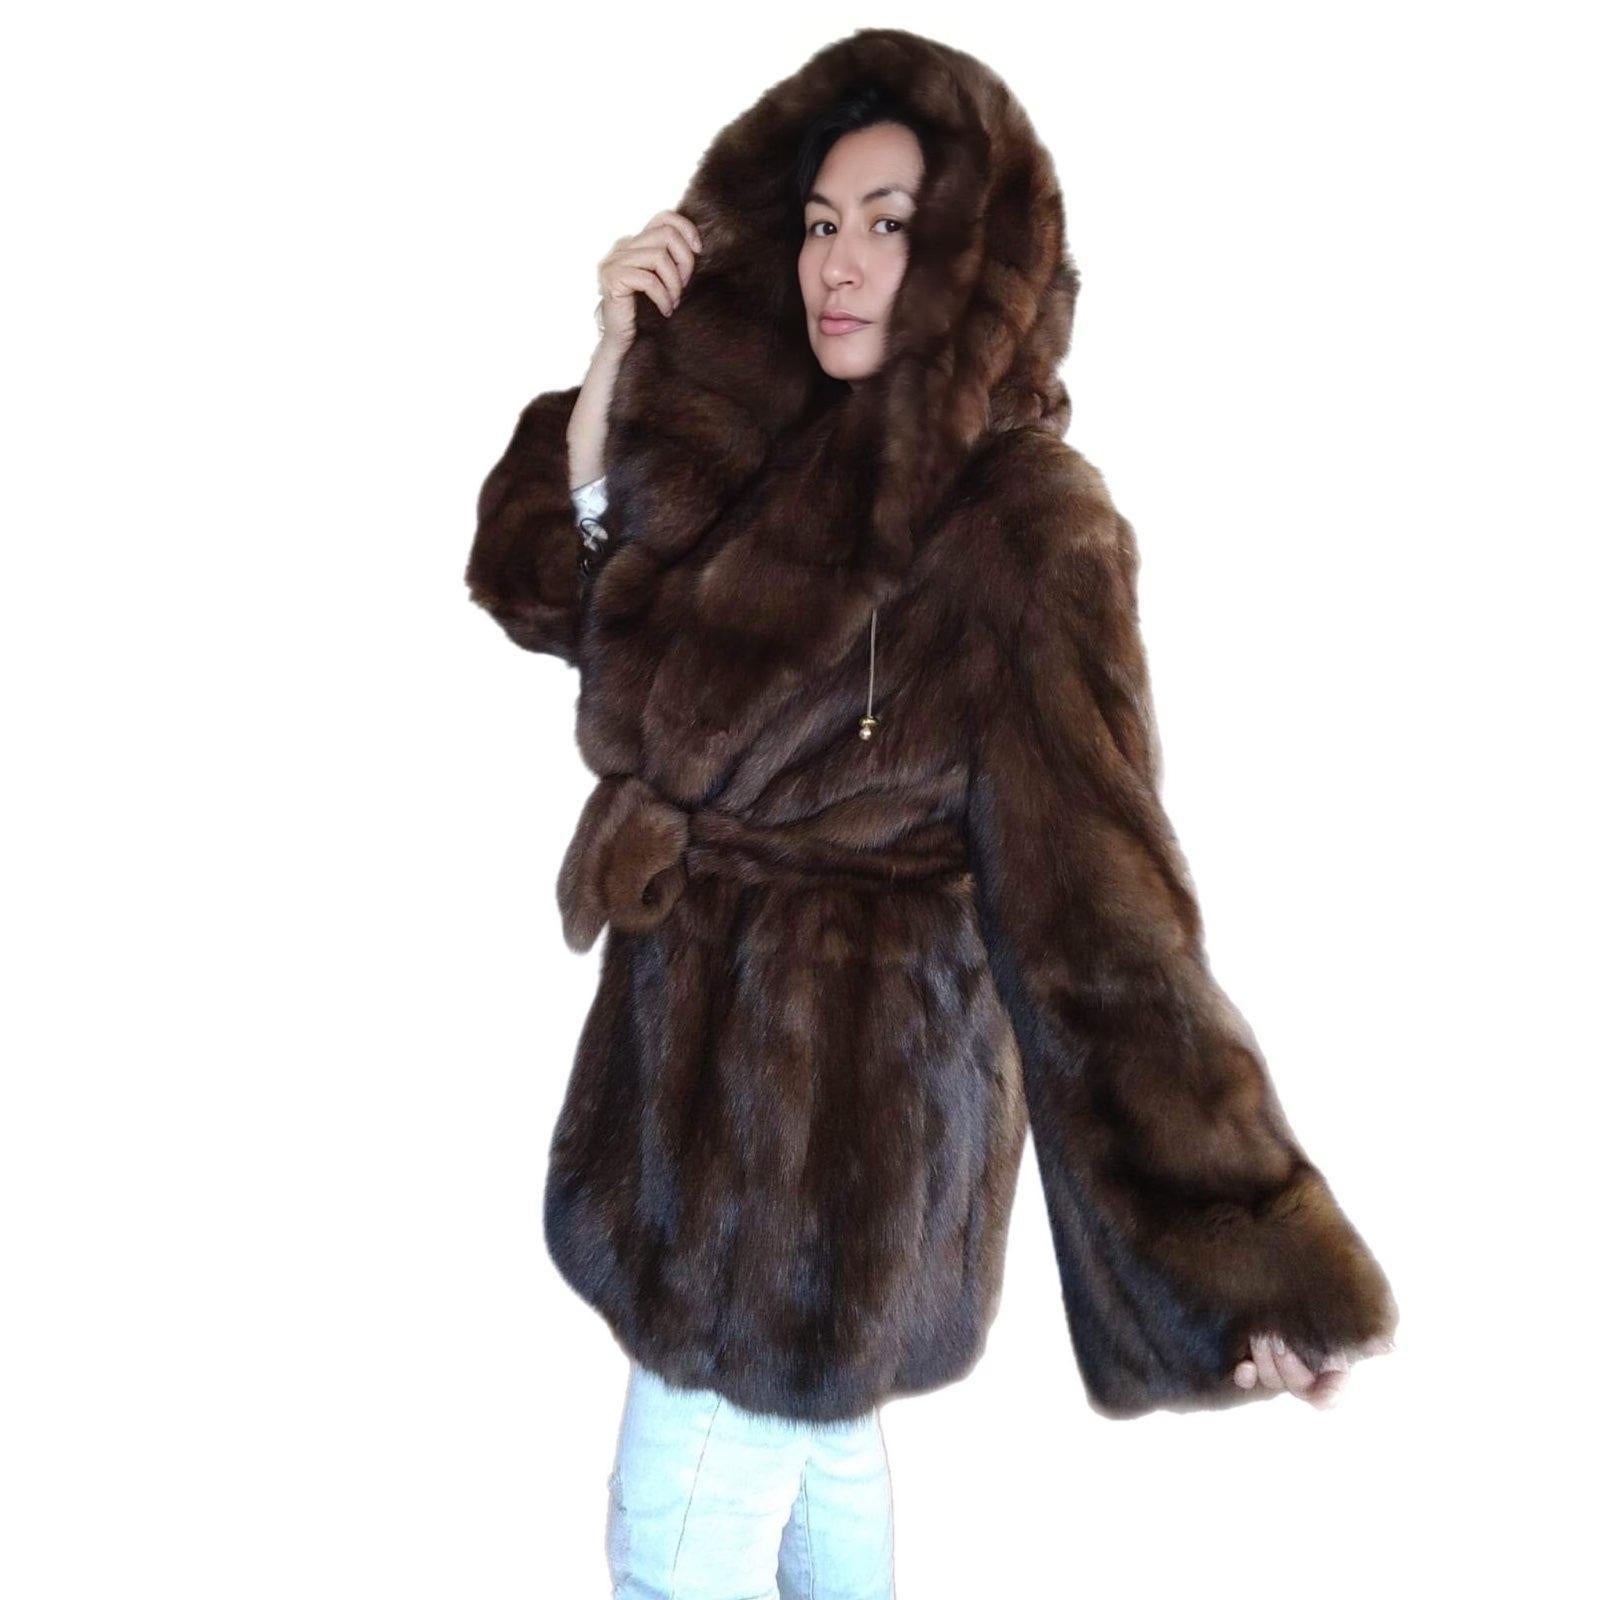 Christian Dior Russian Sable fur coat size 12 tags 55000$ For Sale 8